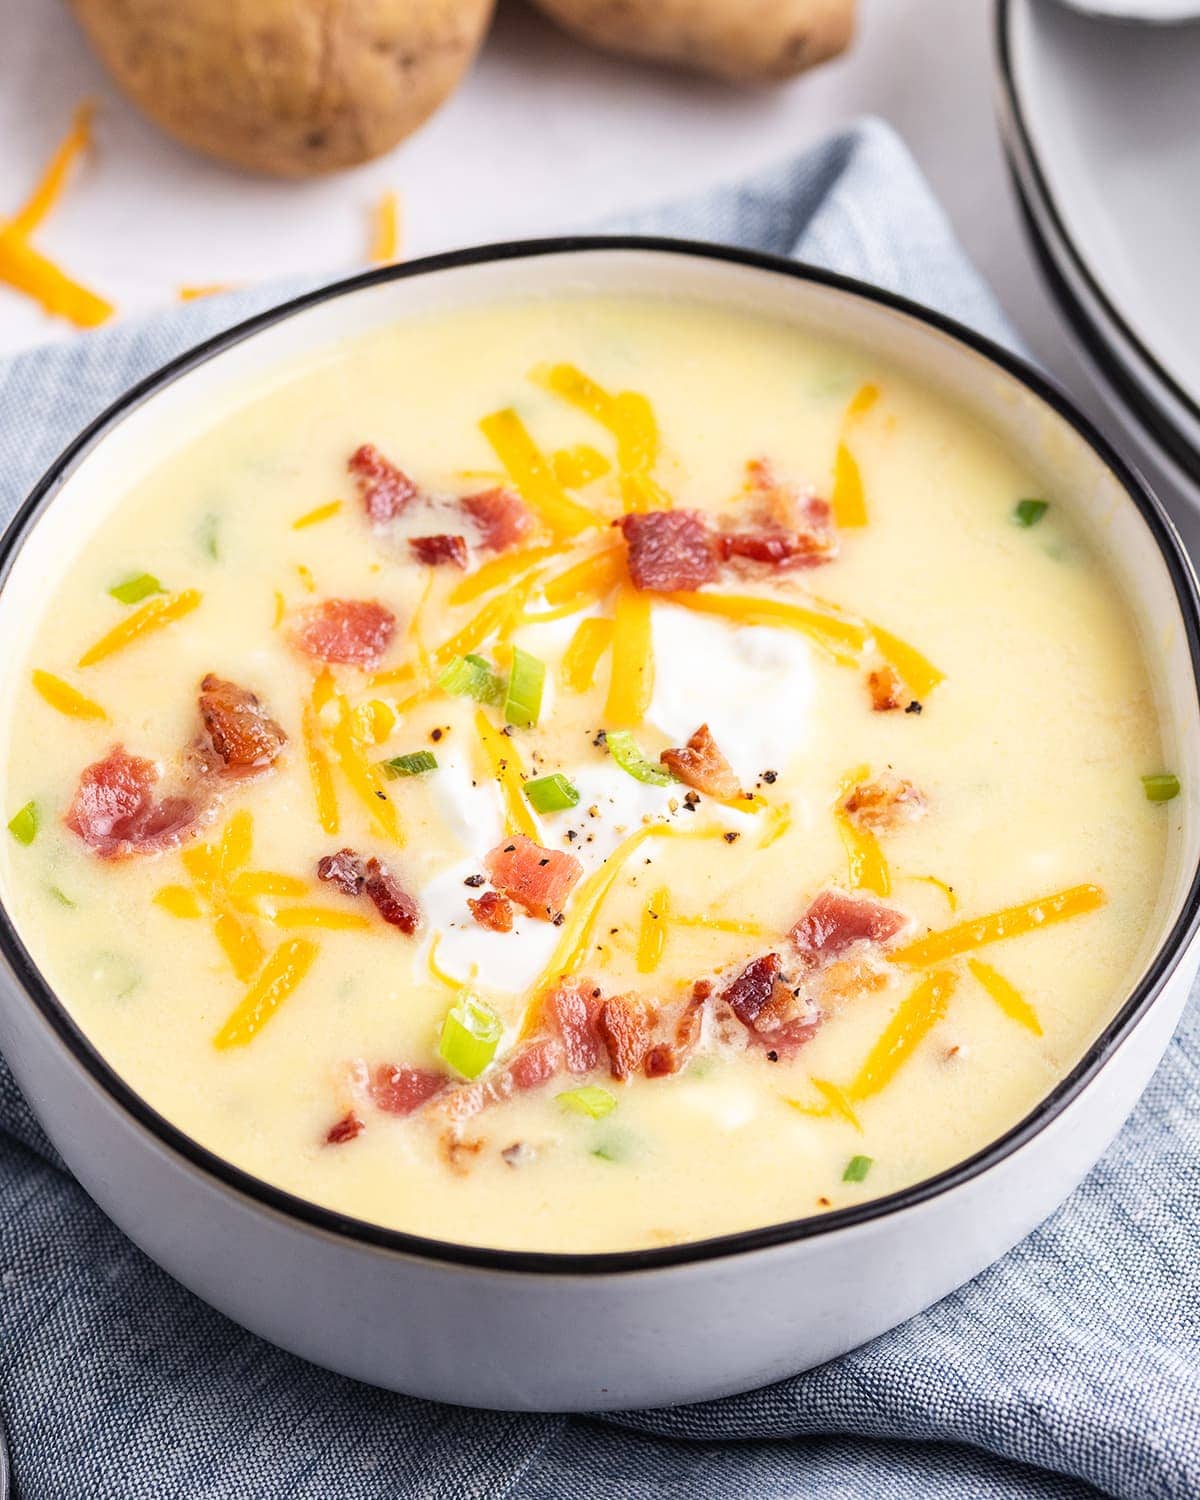 A close up of a bowl of baked potato soup. The soup is yellow colored, and topped with shredded cheese, and crumbled bacon.